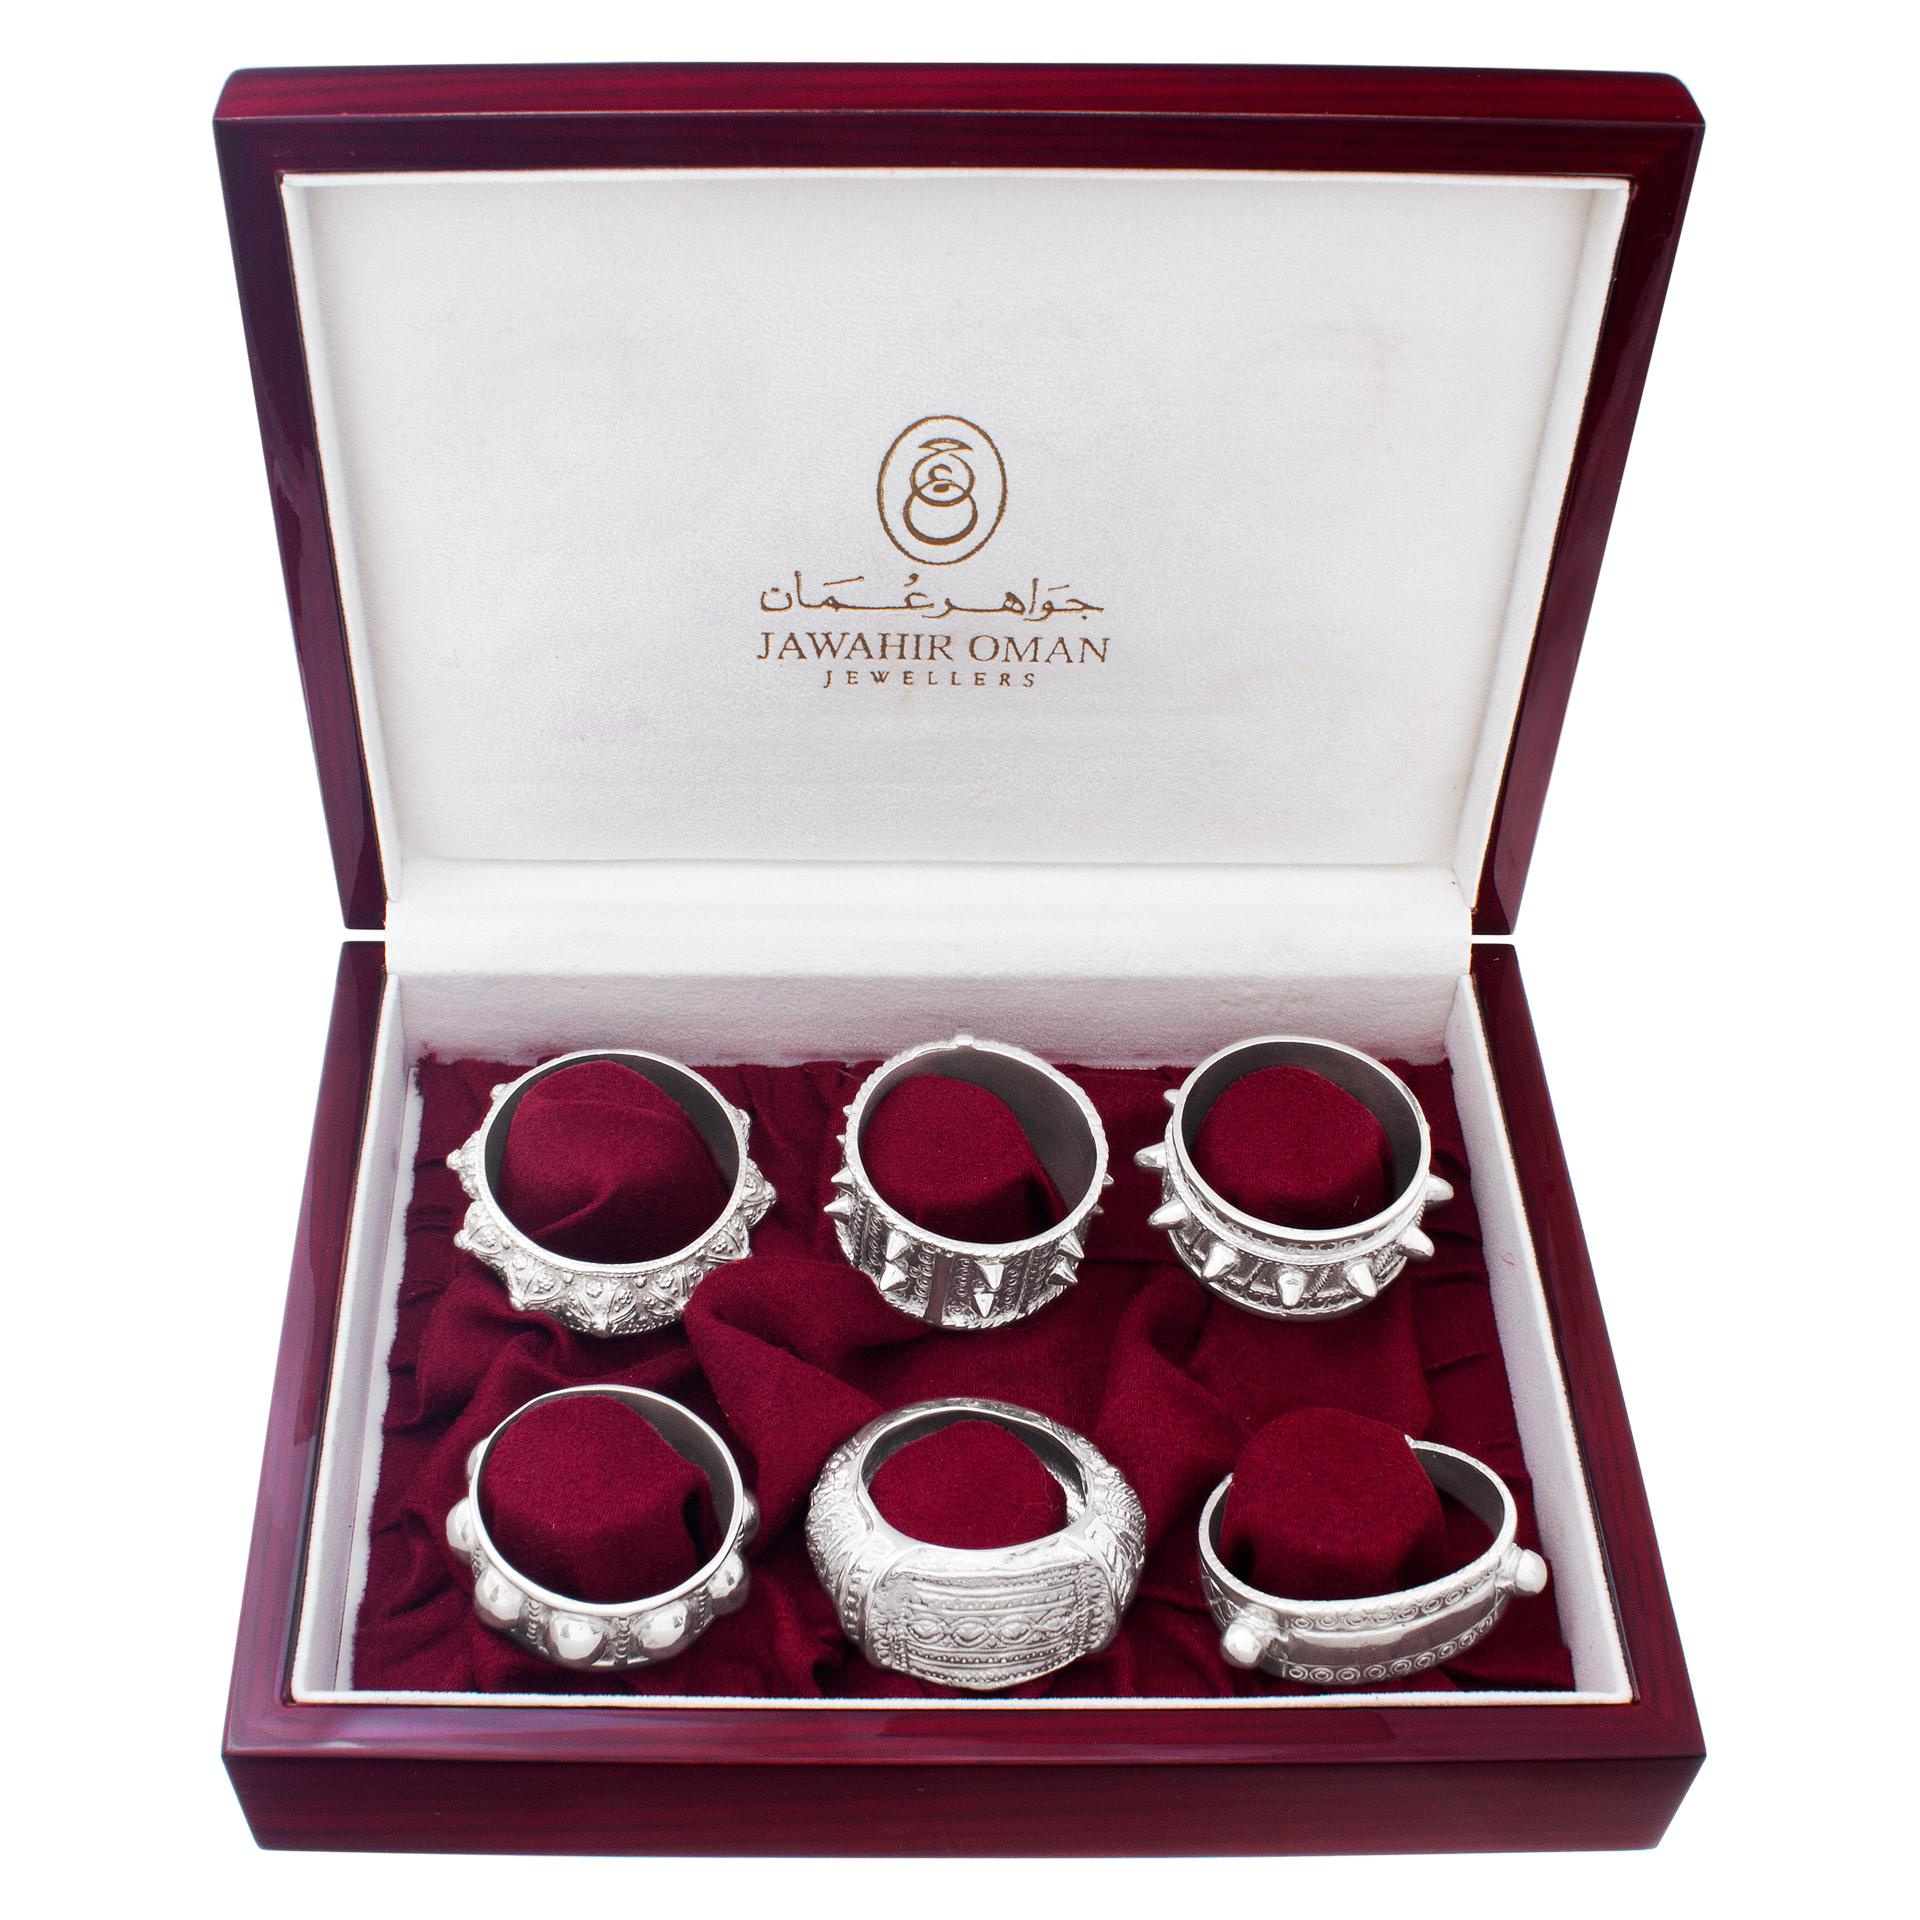 JAWAHIR OMAN JEWELERS, set of six sterling silver napkin ring each of a different design. Each napkin ring is styled like the original Oman bangle bracelet. Complete in original wooden presentation box. Heritage collection is inspired by the